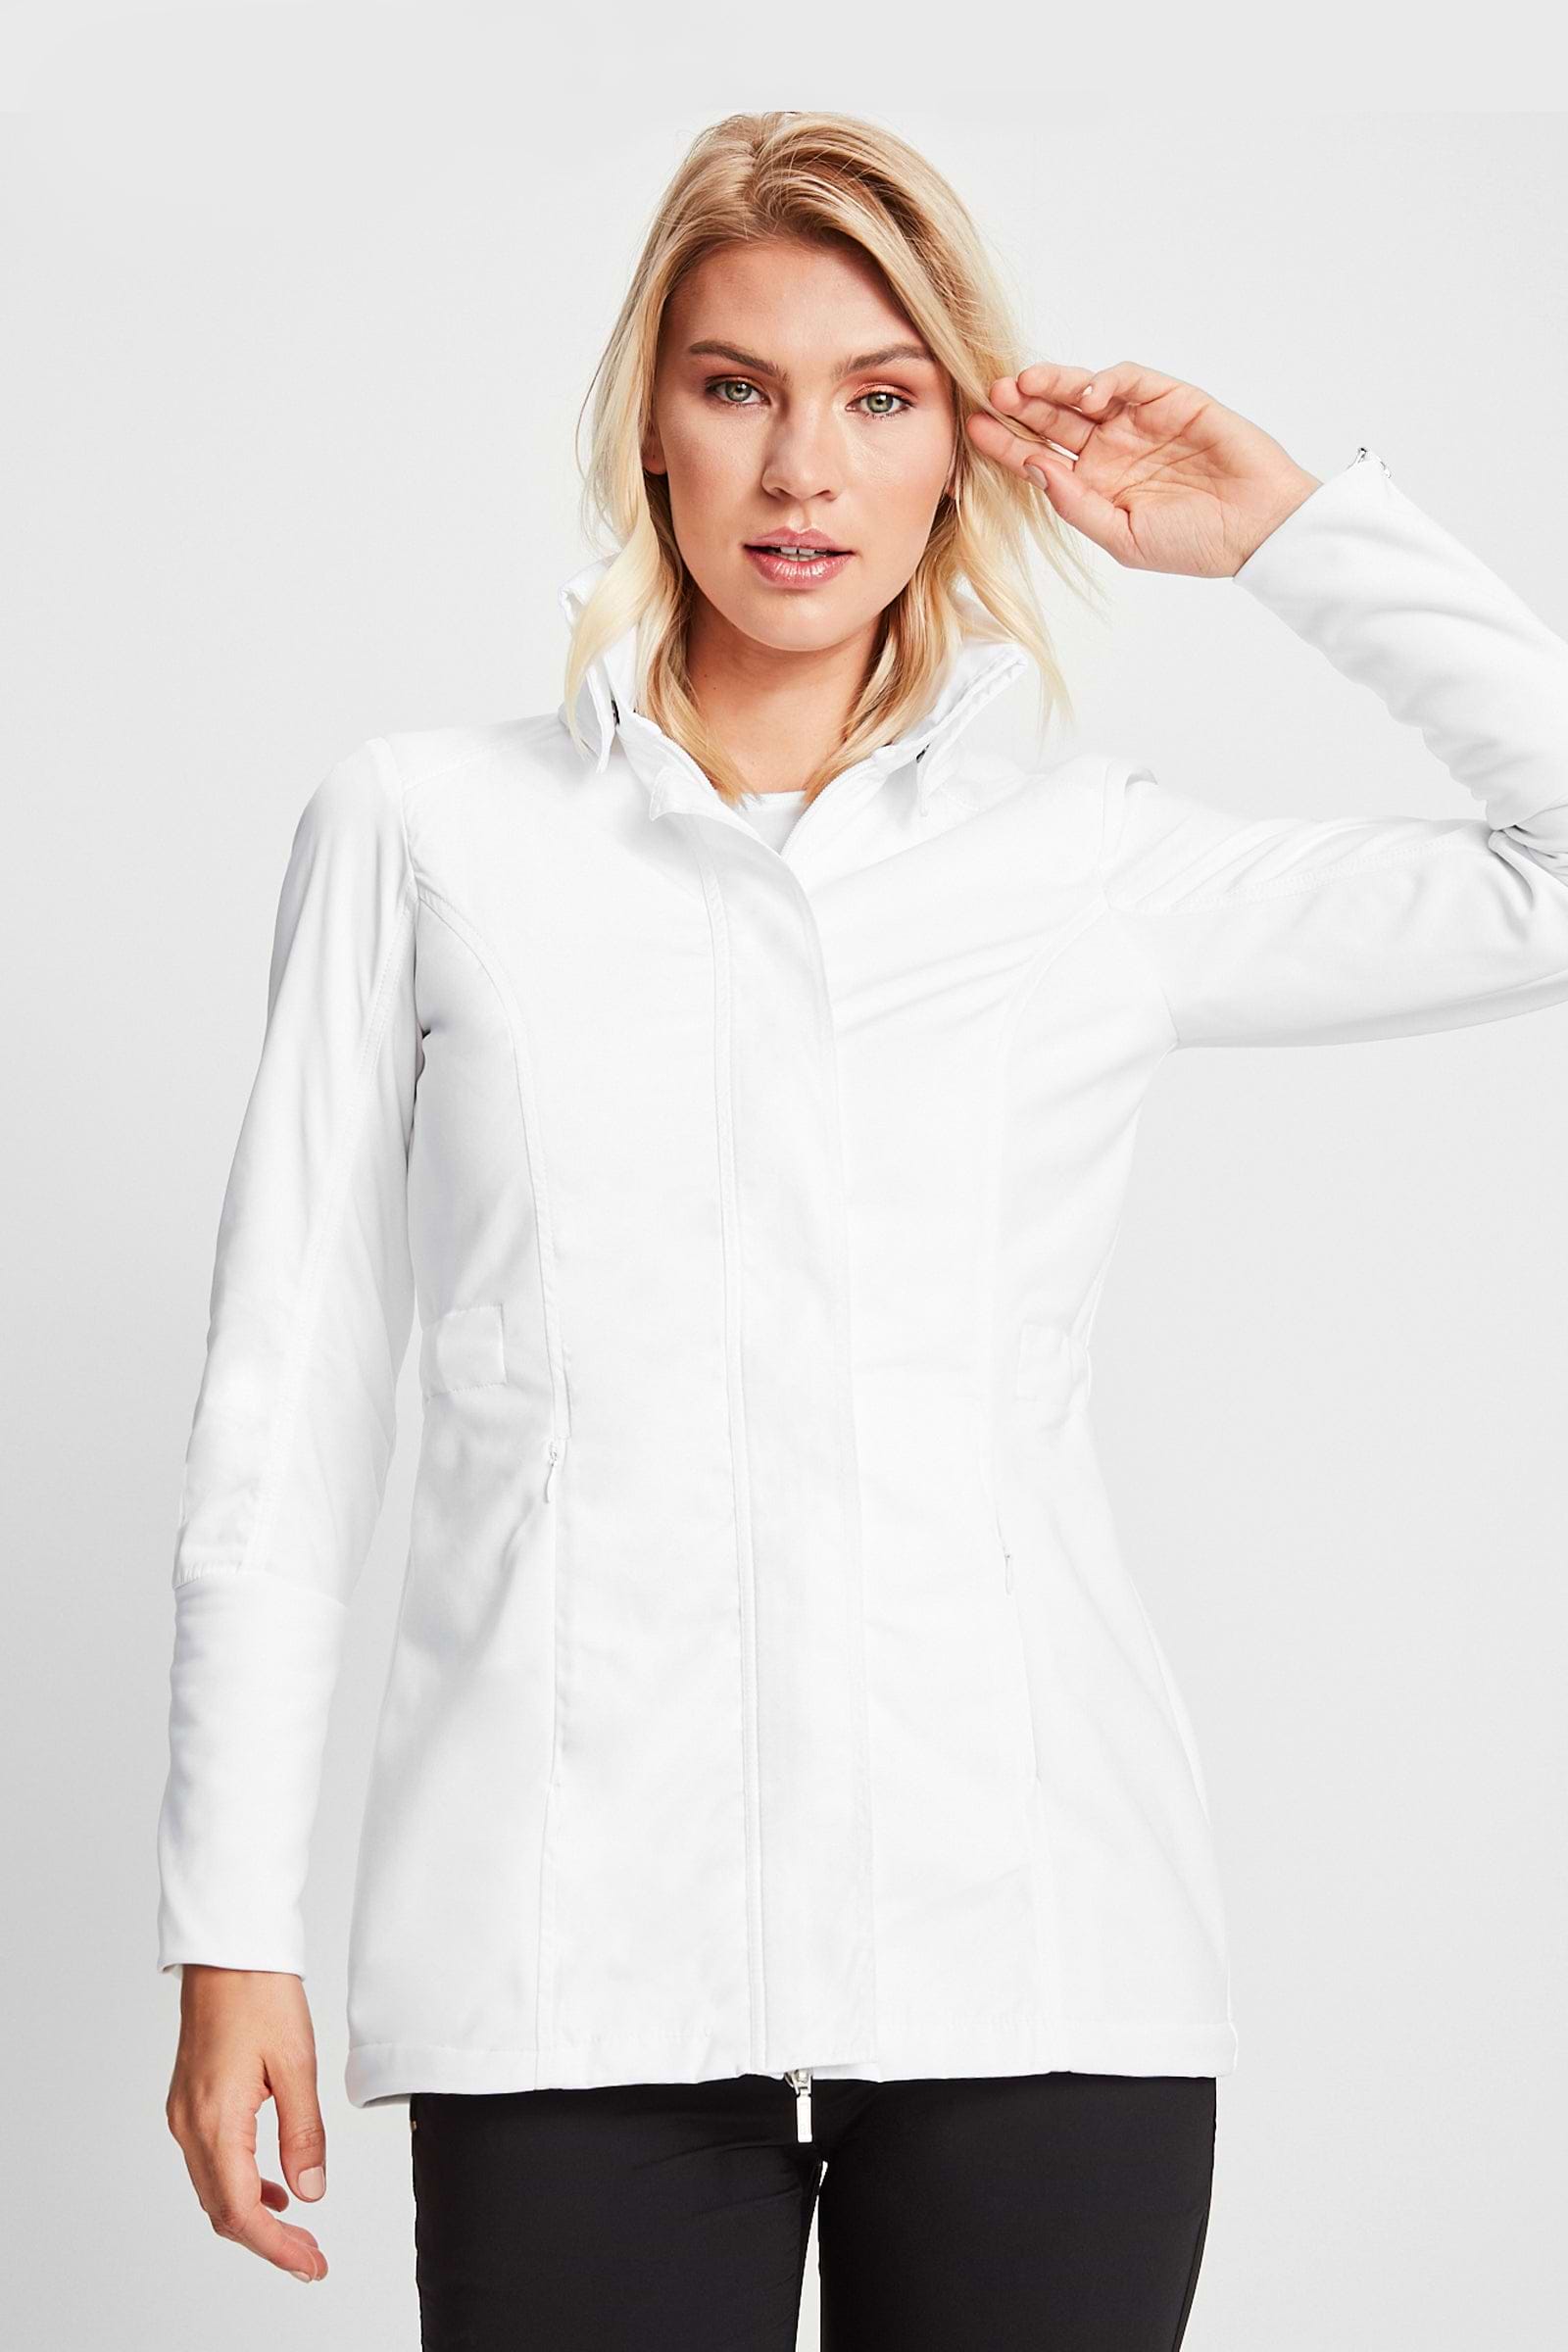 The Best Travel Jacket. Woman Showing the Front Profile of a Travel City Slick Jacket in White